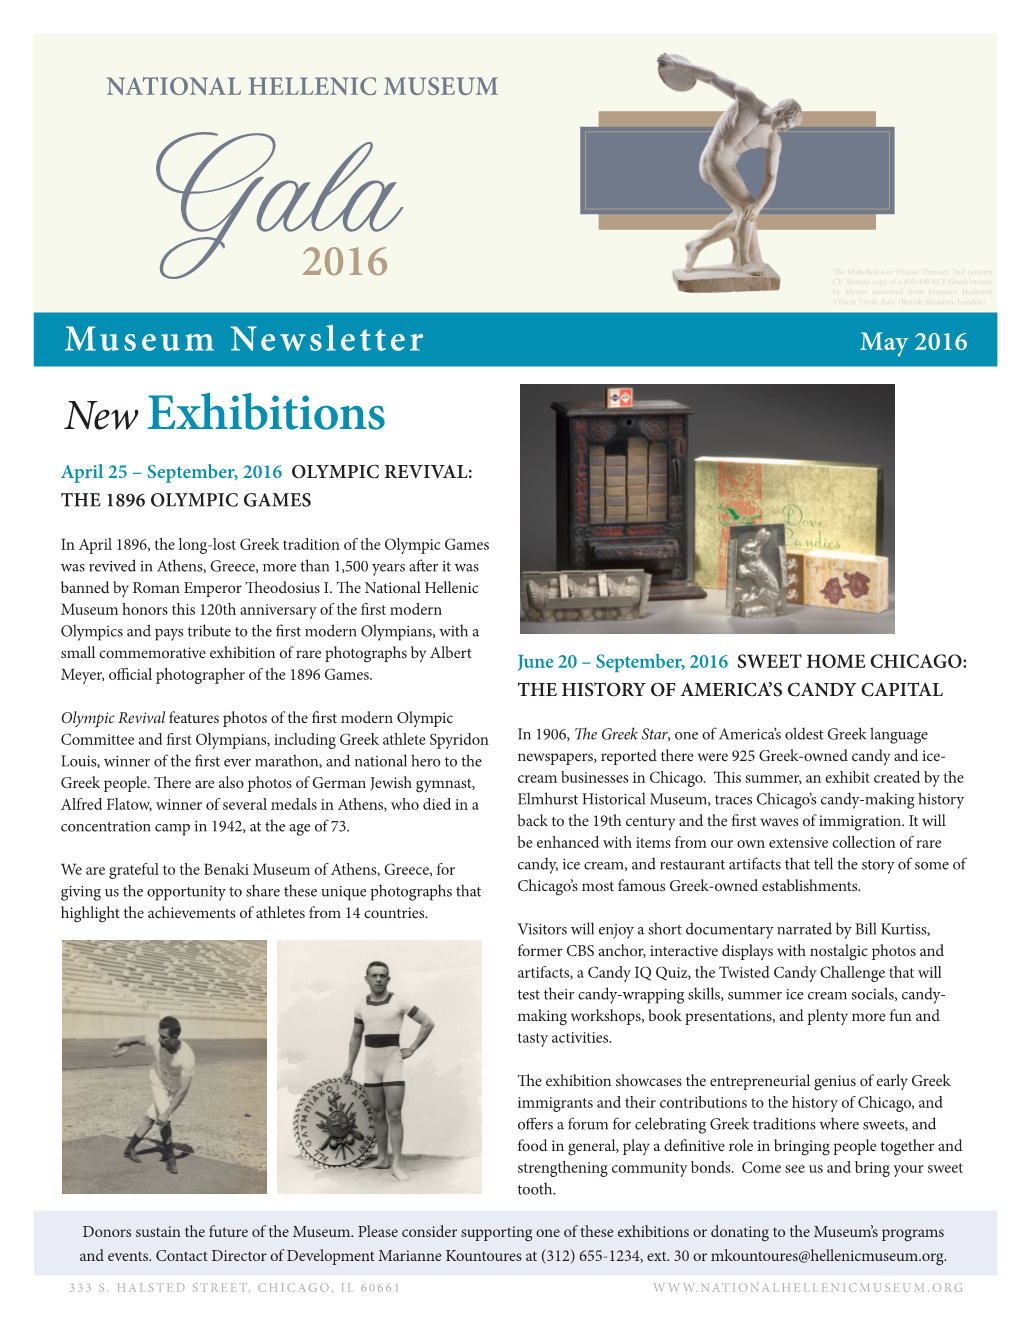 New Exhibitions April 25 – September, 2016 OLYMPIC REVIVAL: the 1896 OLYMPIC GAMES